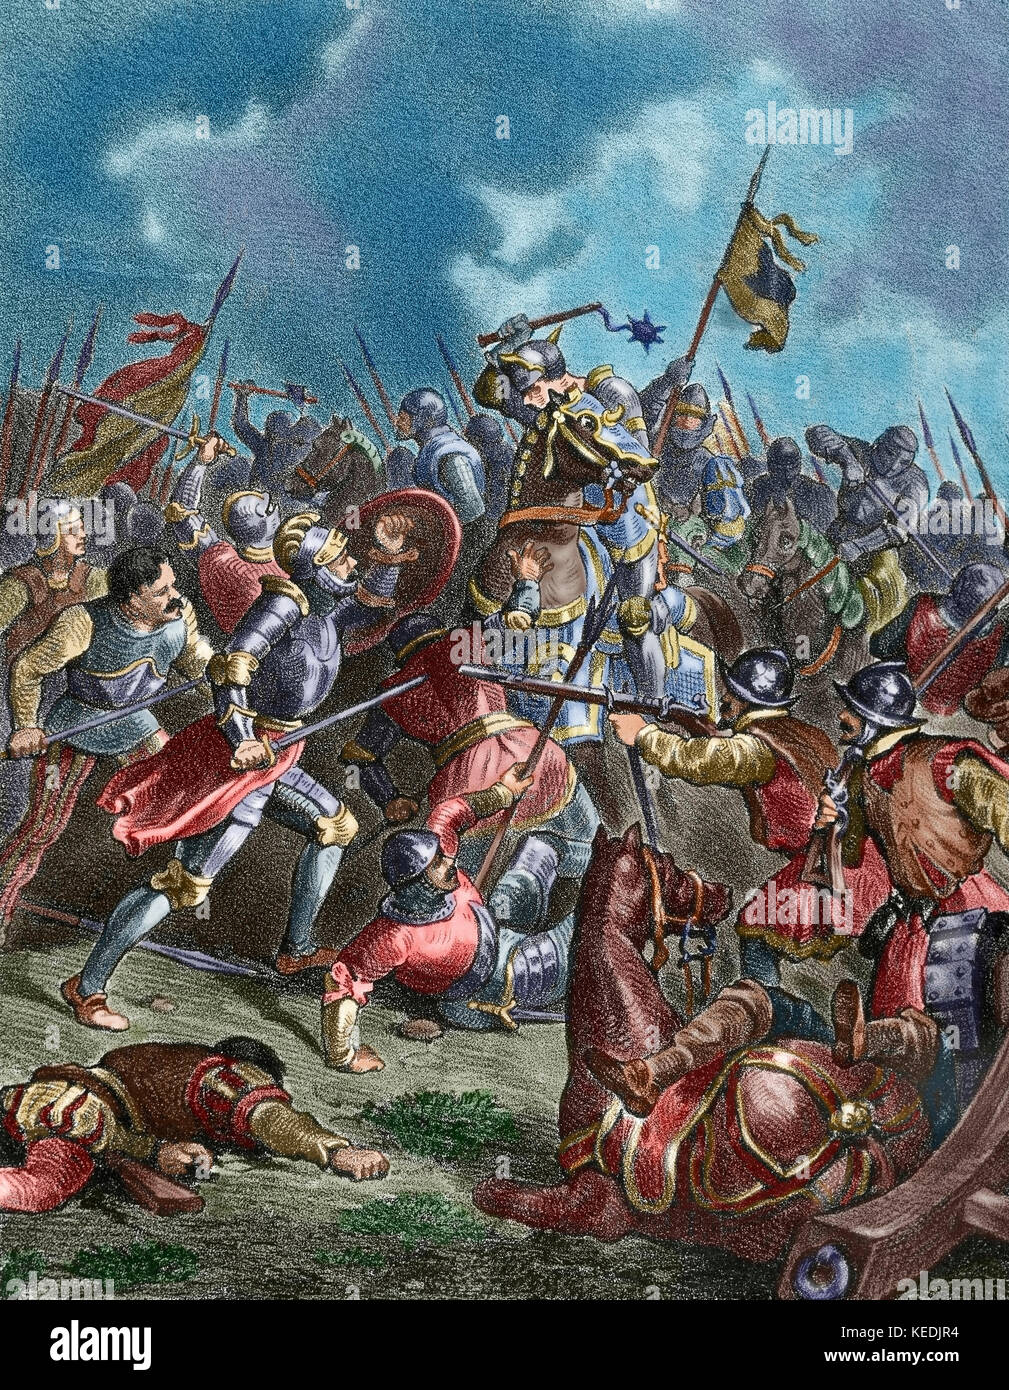 The Italian War of 1542-1546. Battle of Ceresole, 11 April, 1544. The French army, commanded by François de Bourbon (1519-1546), Count of Enghien, defeated the combined forces of the Holy Roman Empire and Spain, commanded by Alfonso d'Avalos d'Aquino (1502-1546), Marquis del Vasto. Engraving. Colored. Stock Photo